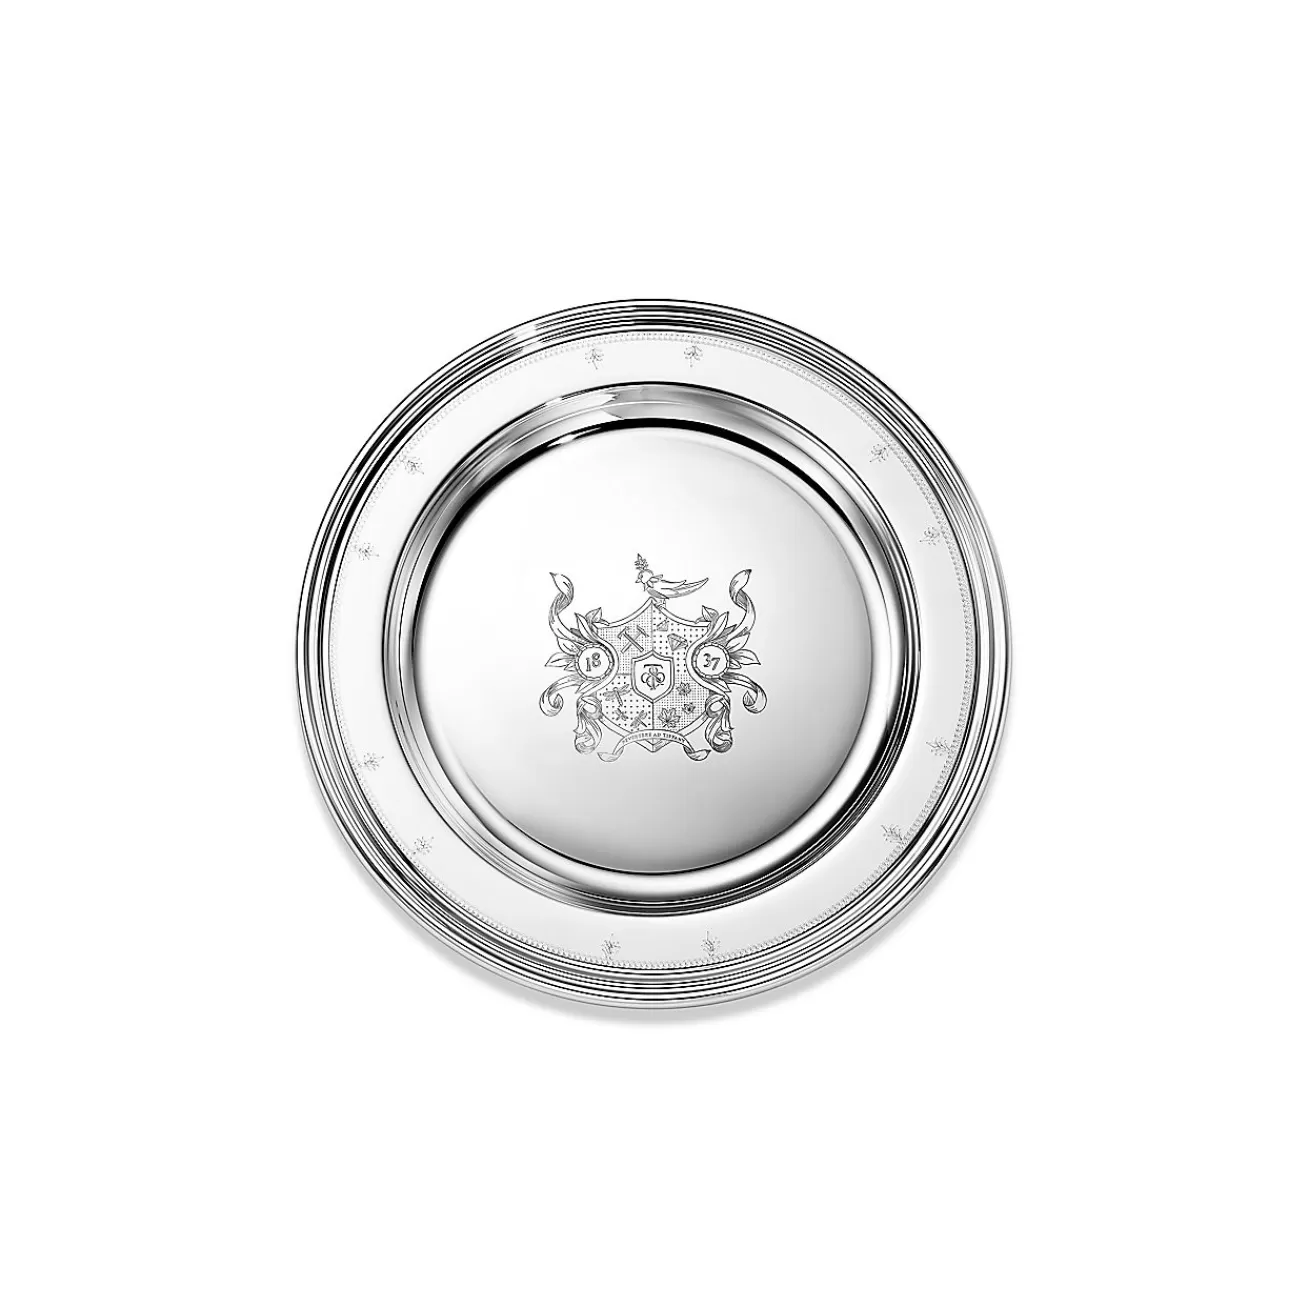 Tiffany & Co. Tiffany Crest Bread and Butter Plate in Sterling Silver | ^ The Home | Housewarming Gifts